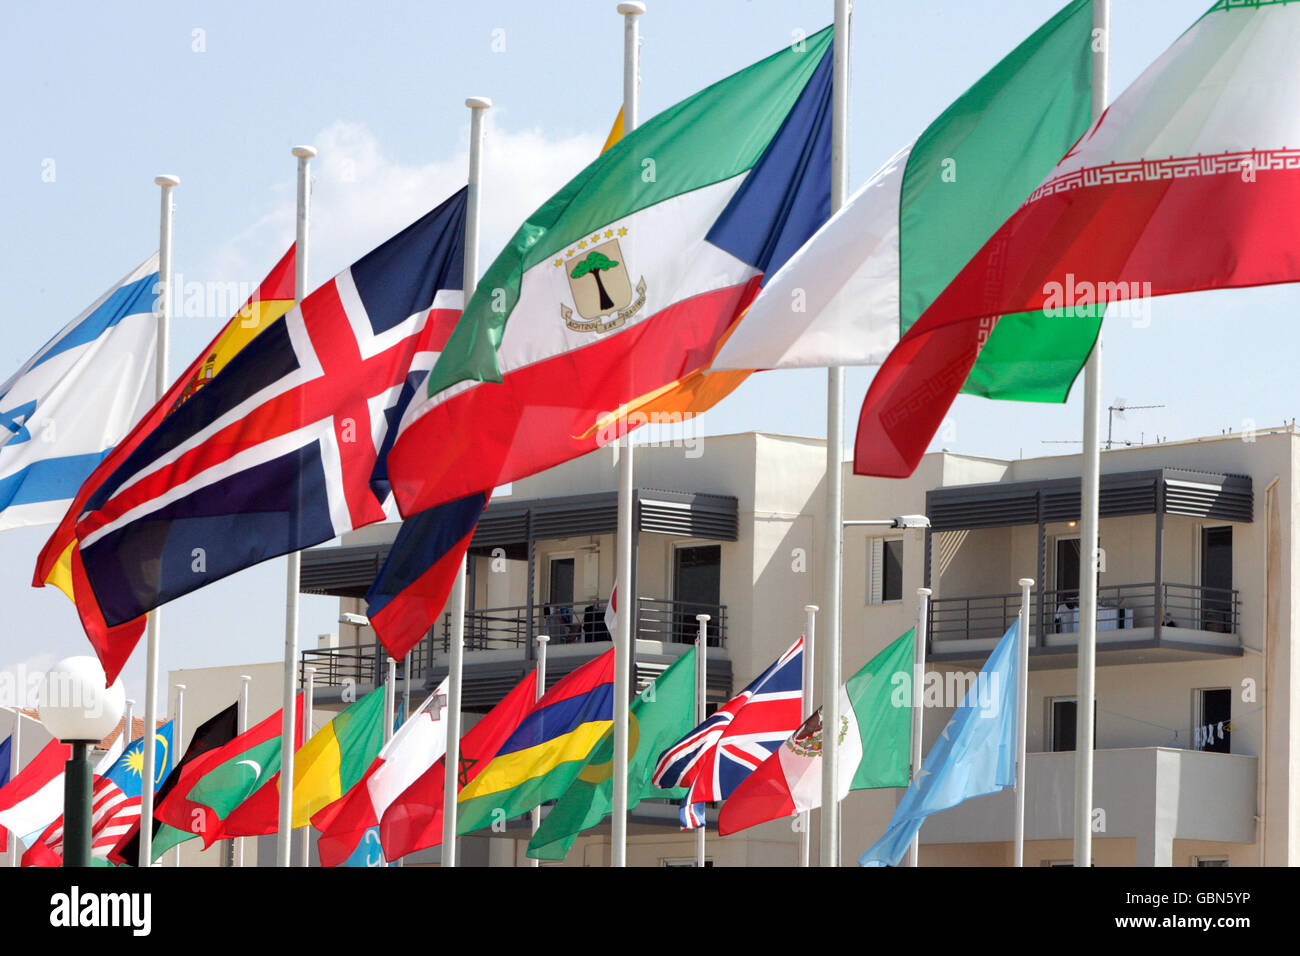 Athens Olympic Games 2004 - Athletes Village. National Flags fly in the Athletes village Stock Photo